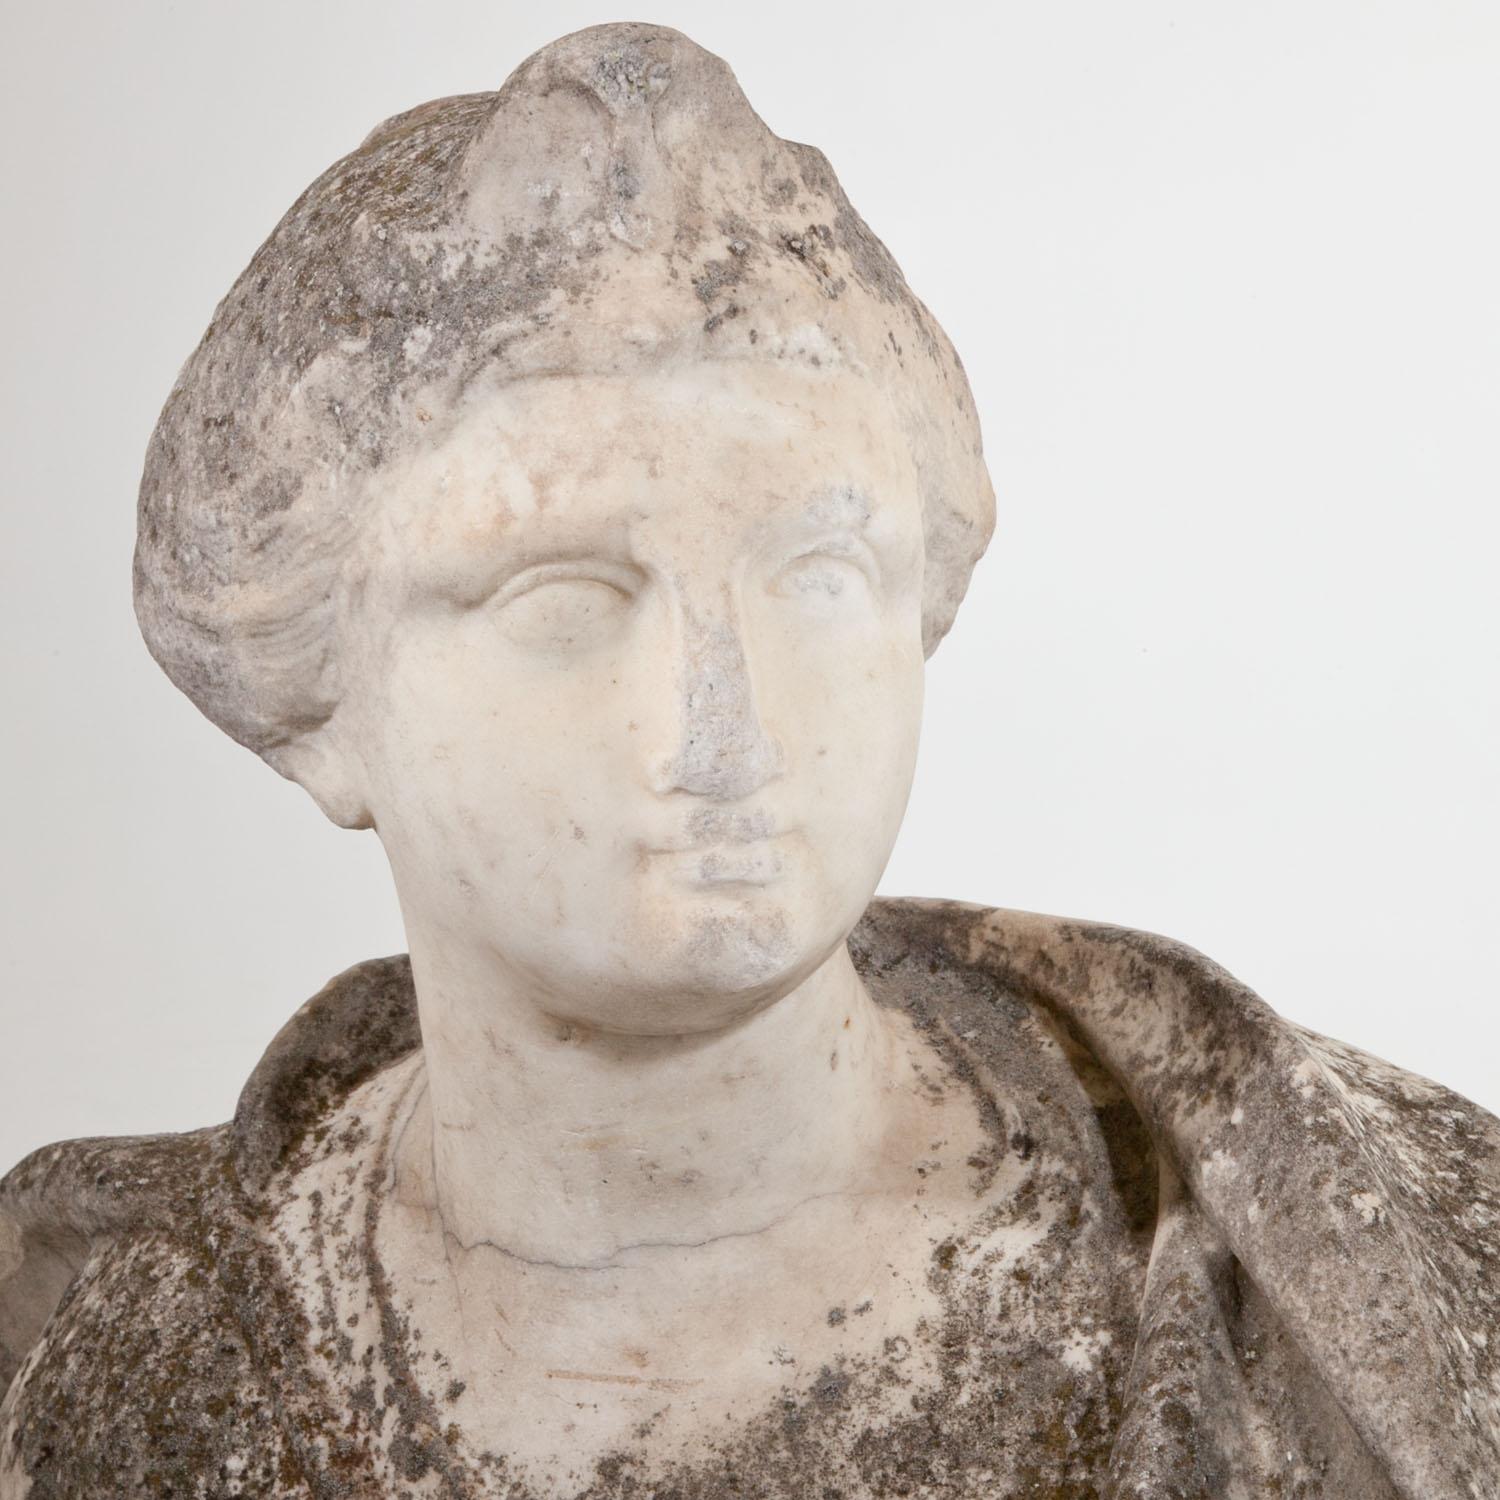 17th century marble bust of a woman wearing a draped gown, her posture is slightly turned to the left. The nose, chin and lips with old abrasions and the gown shows the most natural patina. The backside is concave carved.